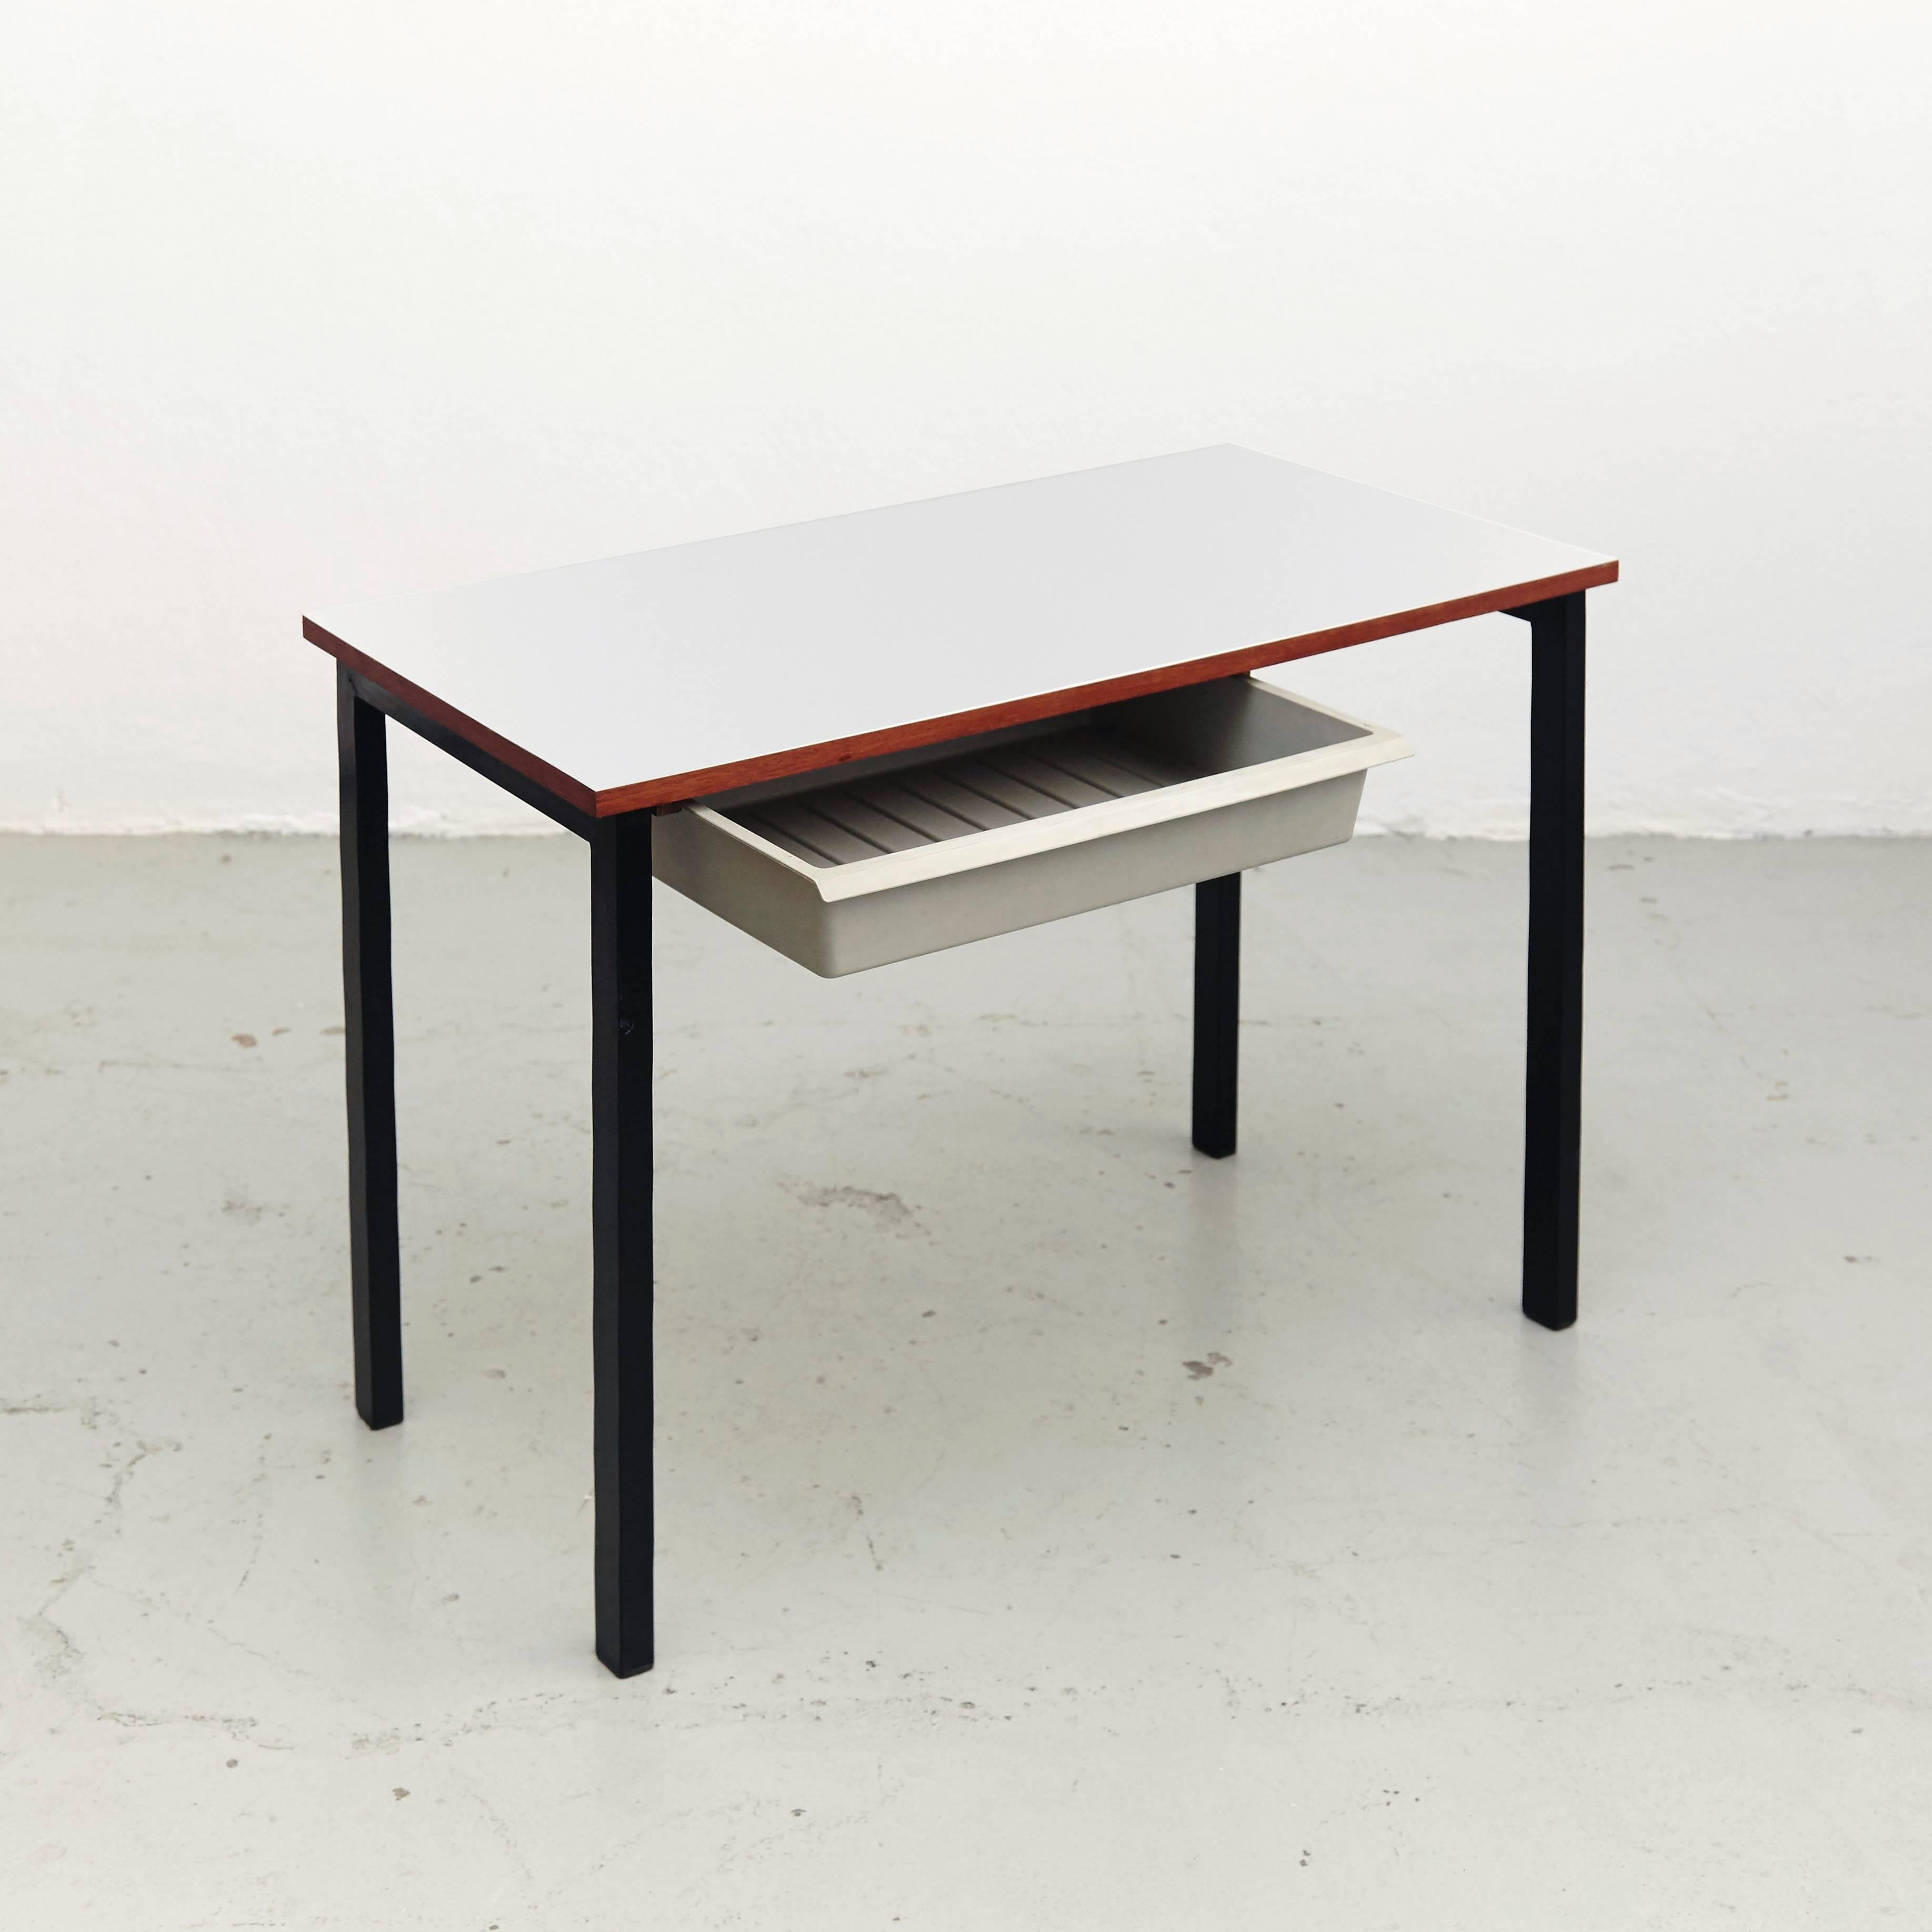 French Charlotte Perriand Console with Drawer, Cite Cansado, circa 1950